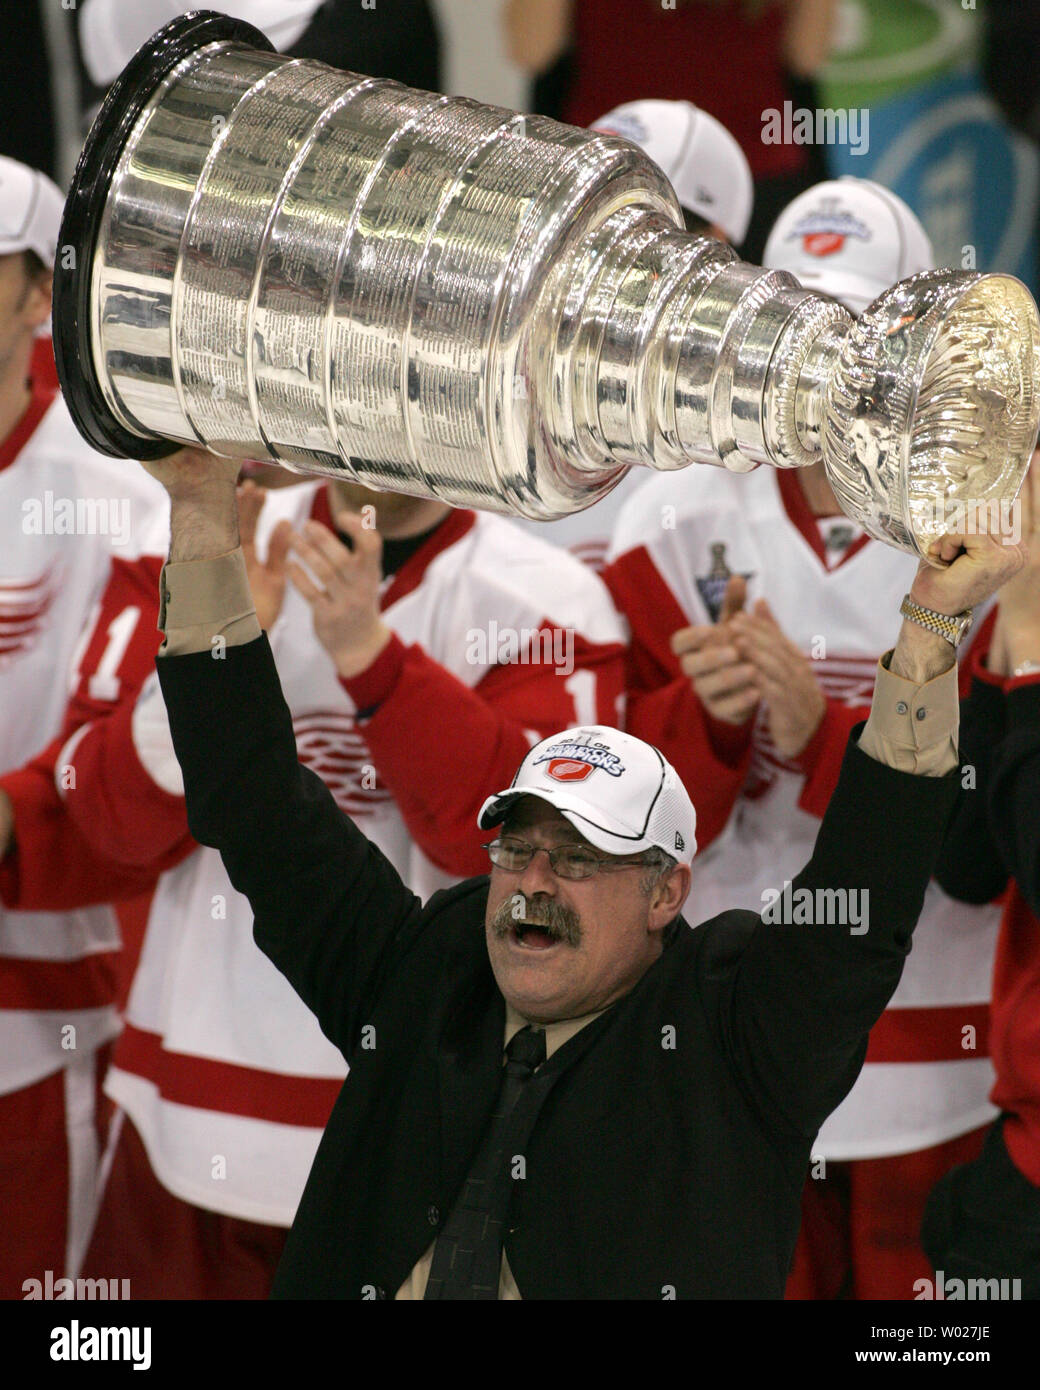 The Detroit Red assistant coach Paul Maclean holds the Stanley Cup in celebration after the Red Wings defeated the Pittsburgh Penguins 3-2 in game six of the 2008 Stanley Cup Finals at the Mellon Arena in Pittsburgh on June 4, 2008. The Red Wings won the series 4 games to 2.     (UPI Photo/Stephen Gross) Stock Photo